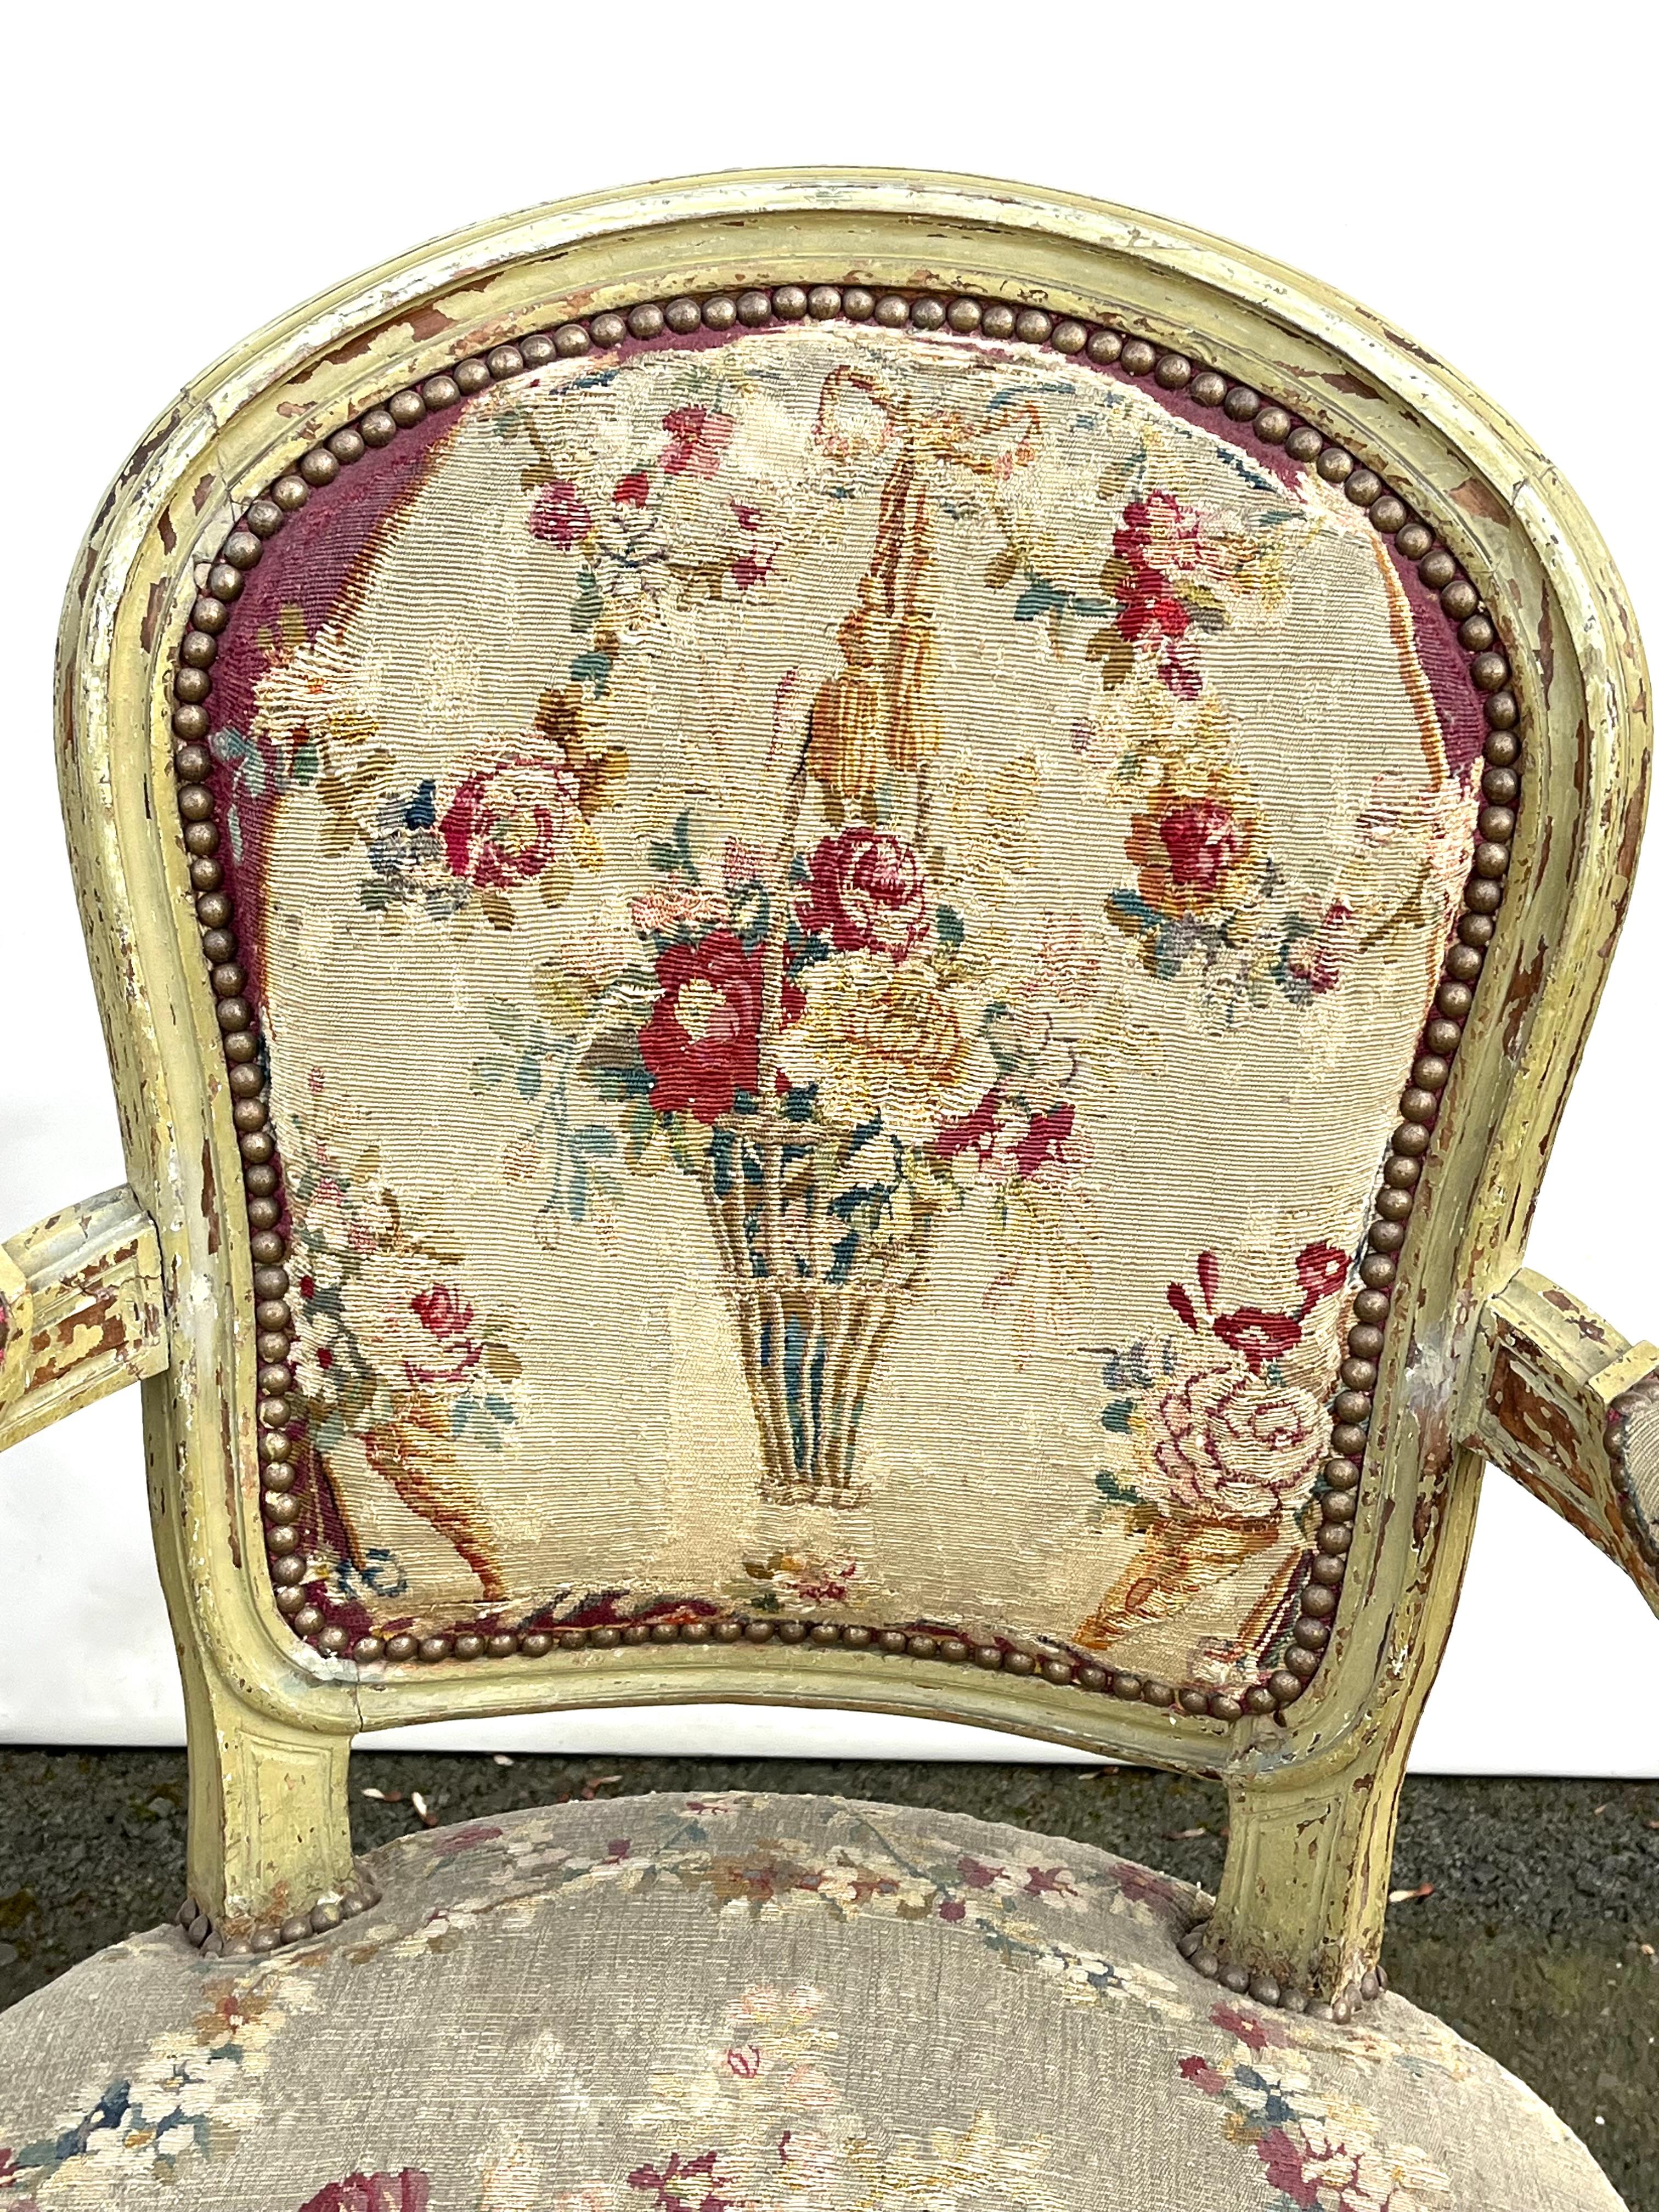 Set of 4 Louis XVI Period Fauteuils Stamped ”F. Lapierre a Lyon” In Good Condition For Sale In Doylestown, PA